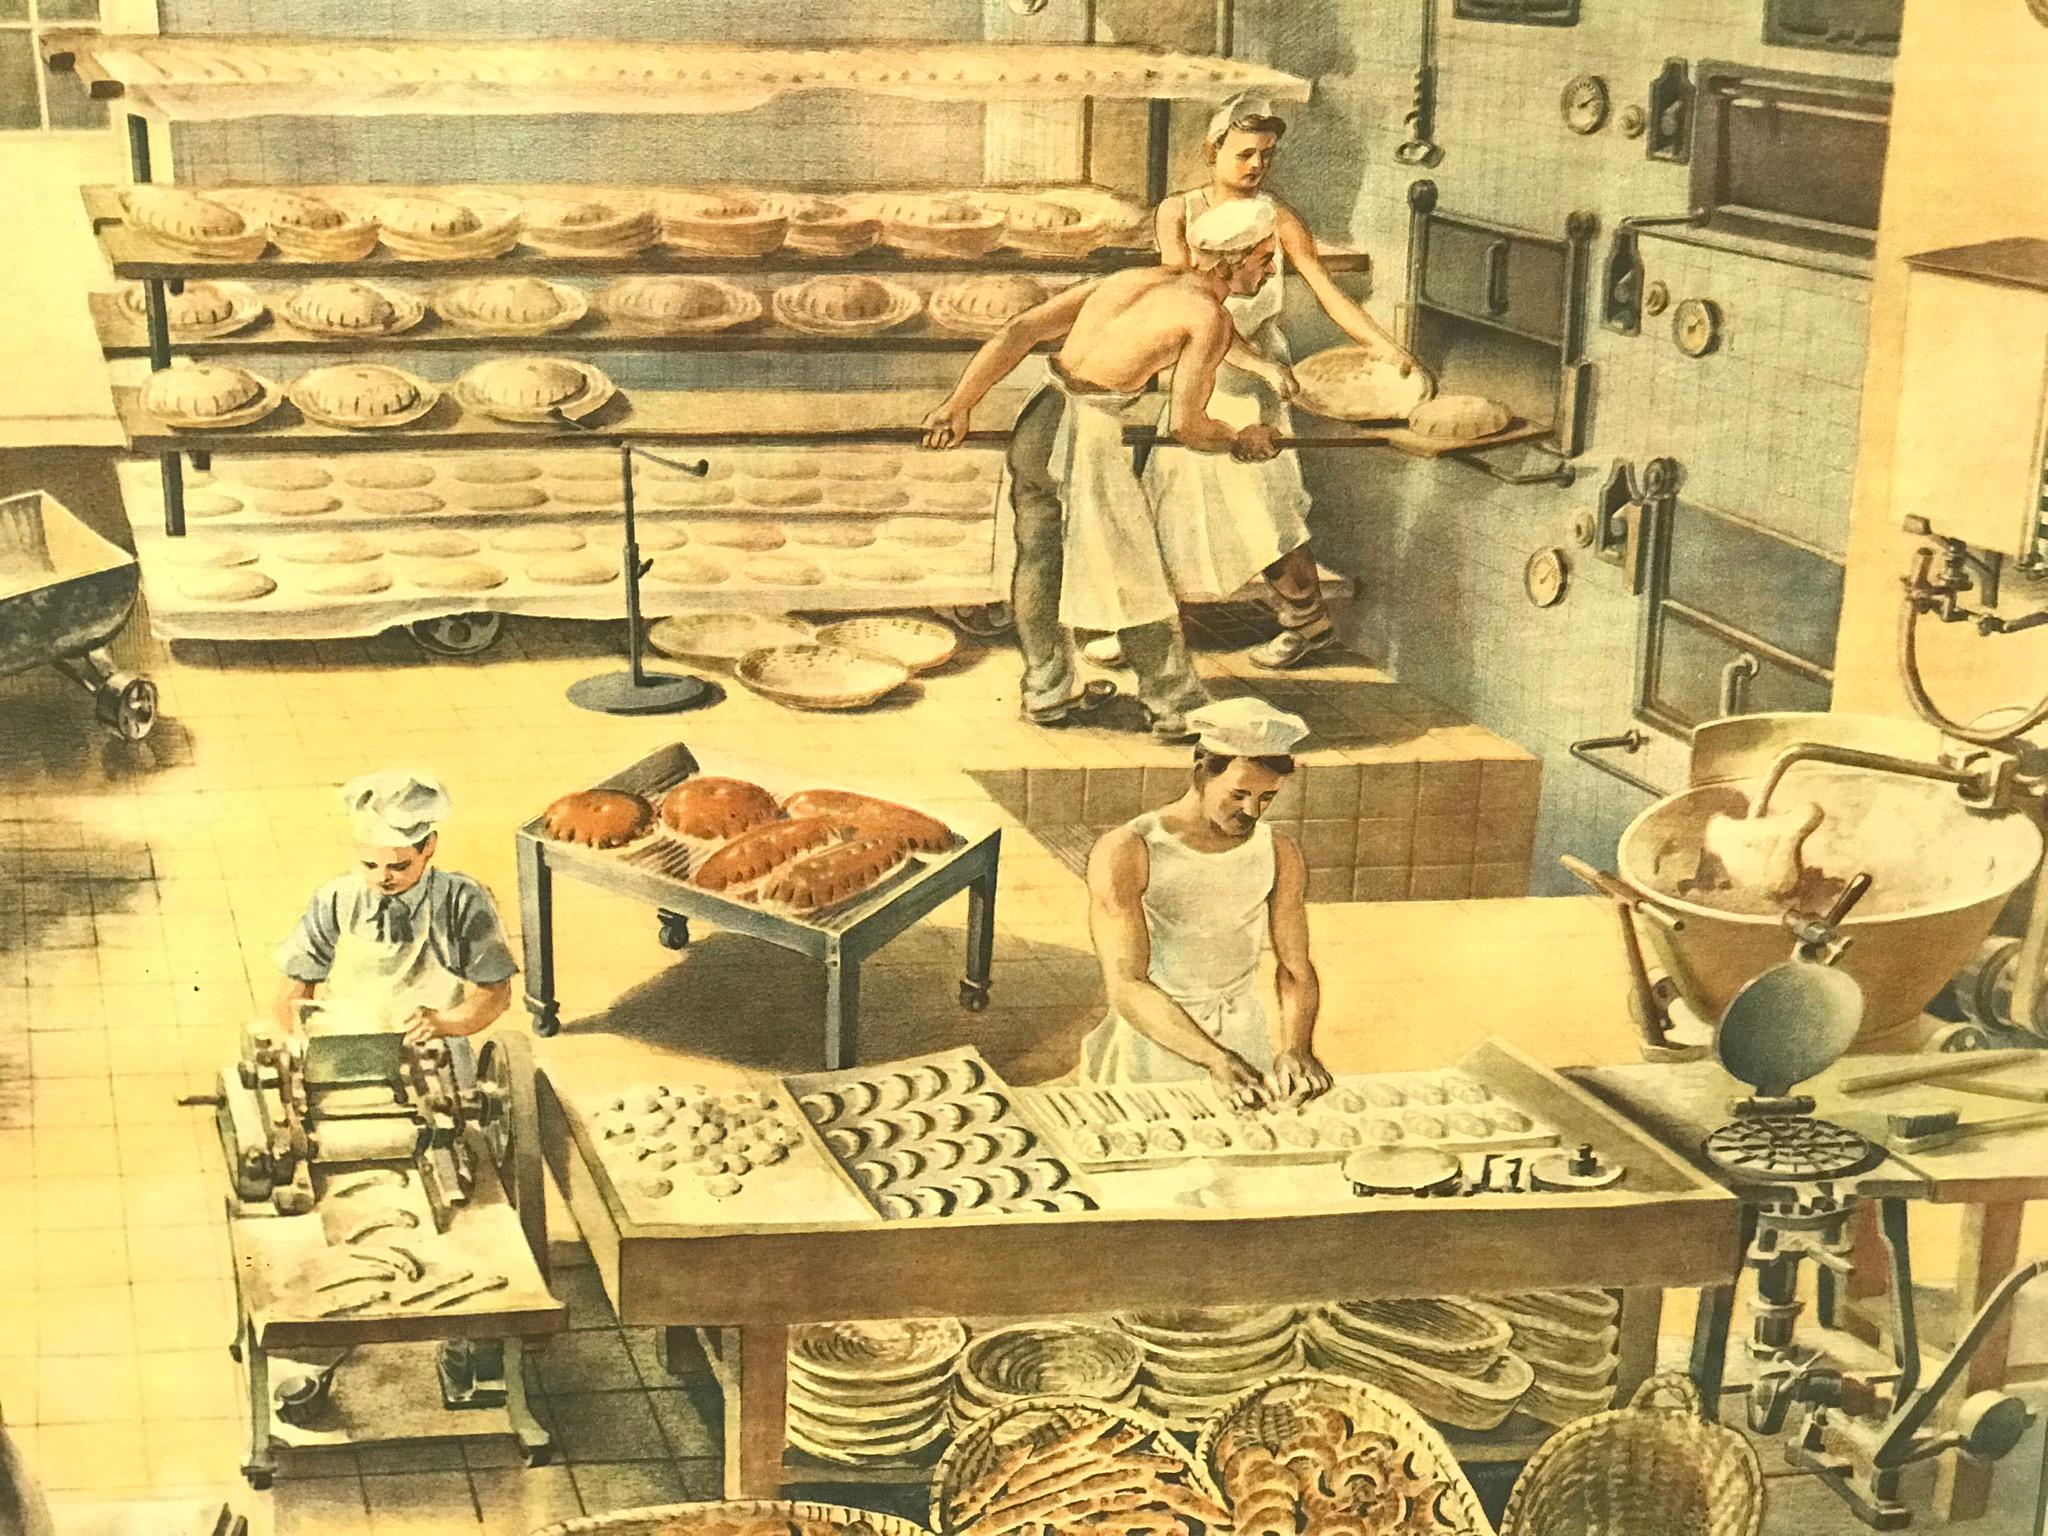 The poster is colored printed with a view of bakery in the original condition.